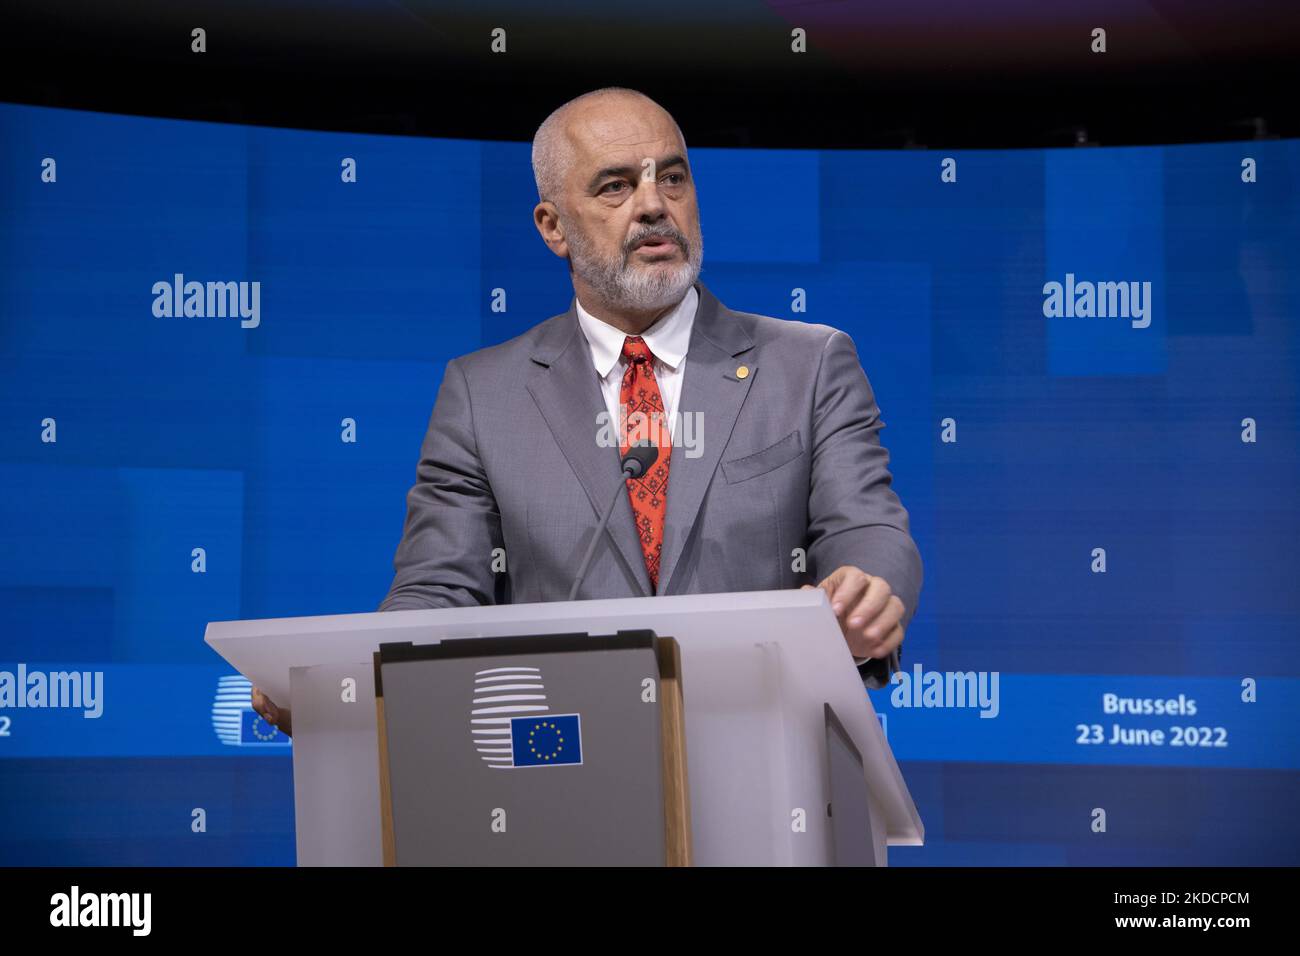 Edi Rama Prime Minister of Albania as seen talking to the media and journalists at a press conference after the EU - Western Balkan summit with the main topic the enlargement of European Union on the Western Balkans. The EU expansion negotiations failed for the six Balkan countries of Albania, Bosnia, Kosovo, Montenegro, North Macedonia and Serbia but Ukraine and Moldova have both been accepted with the status of EU candidate members. EU - Western Balkan Leader's meeting on 23 June 2022, ahead of the European Council summit in Brussels, Belgium. (Photo by Nicolas Economou/NurPhoto) Stock Photo